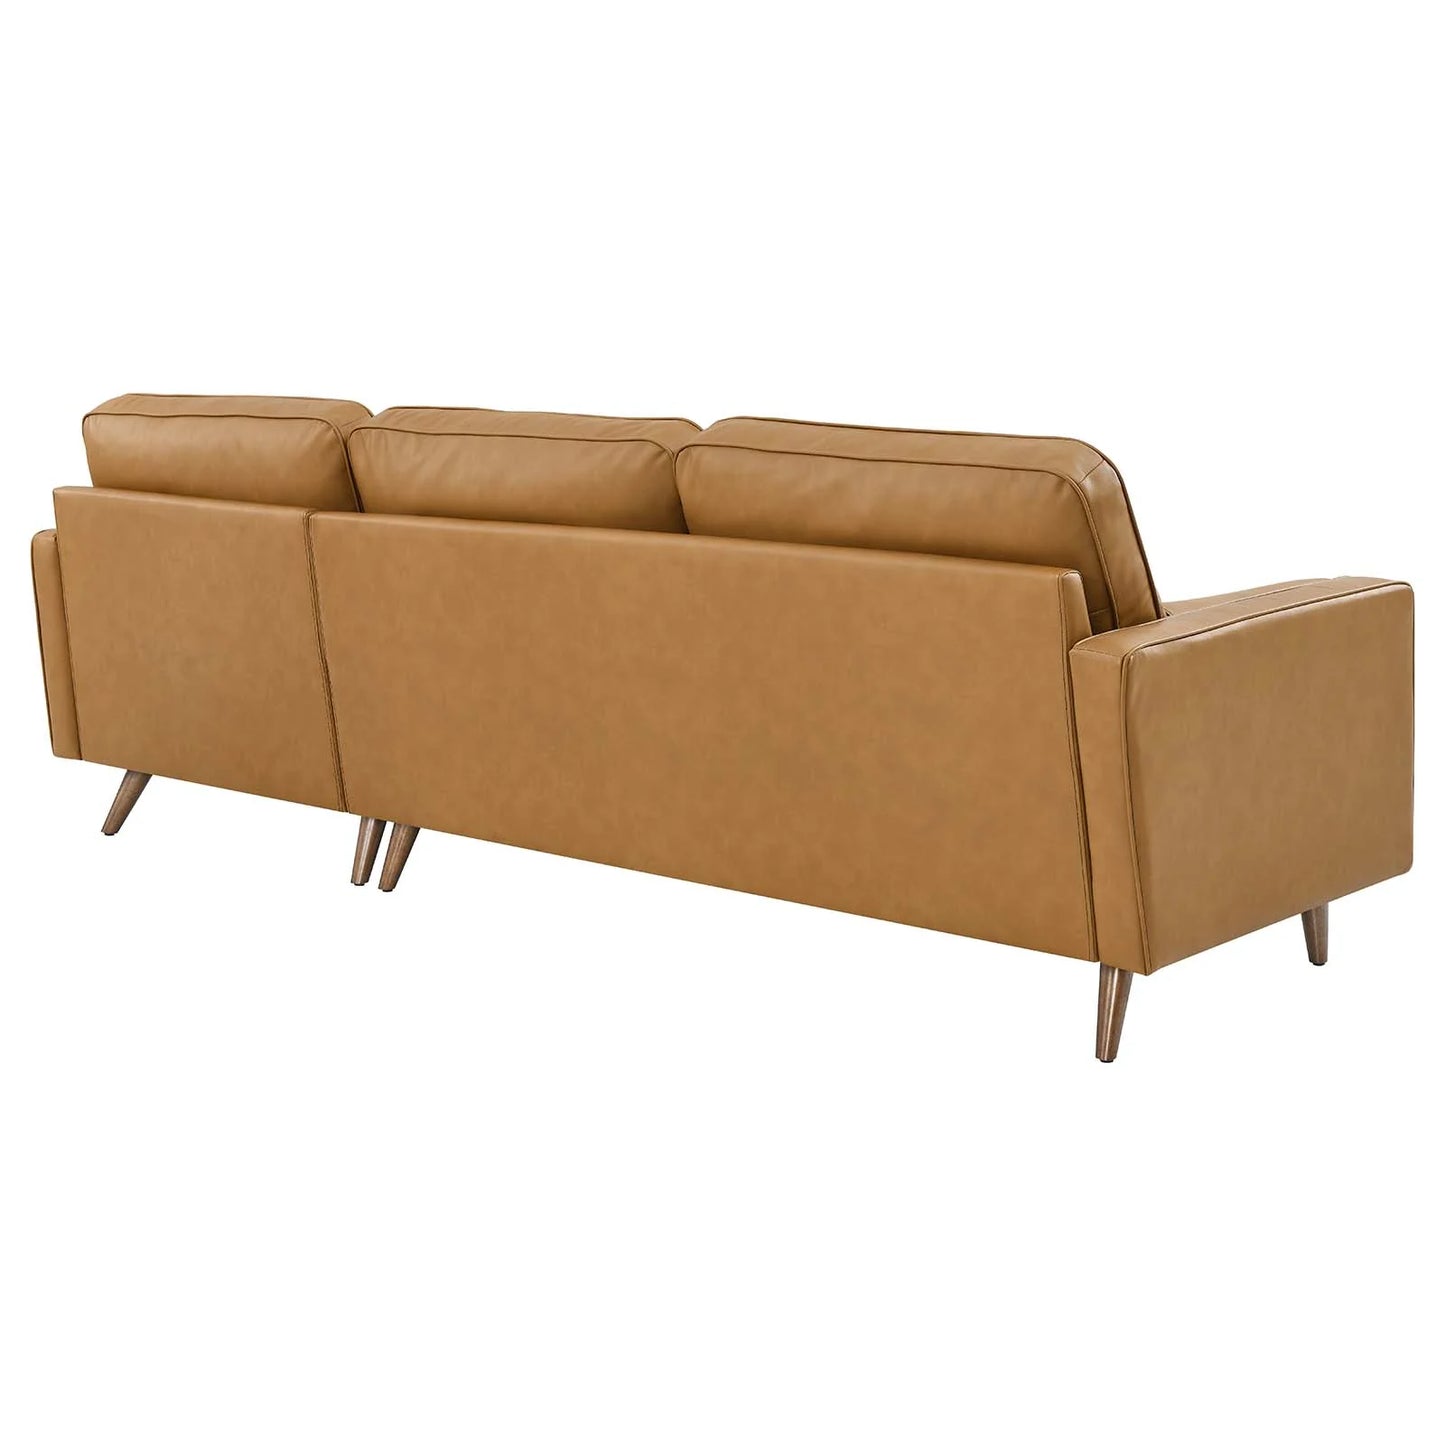 Wren 98" Leather Sectional Sofa